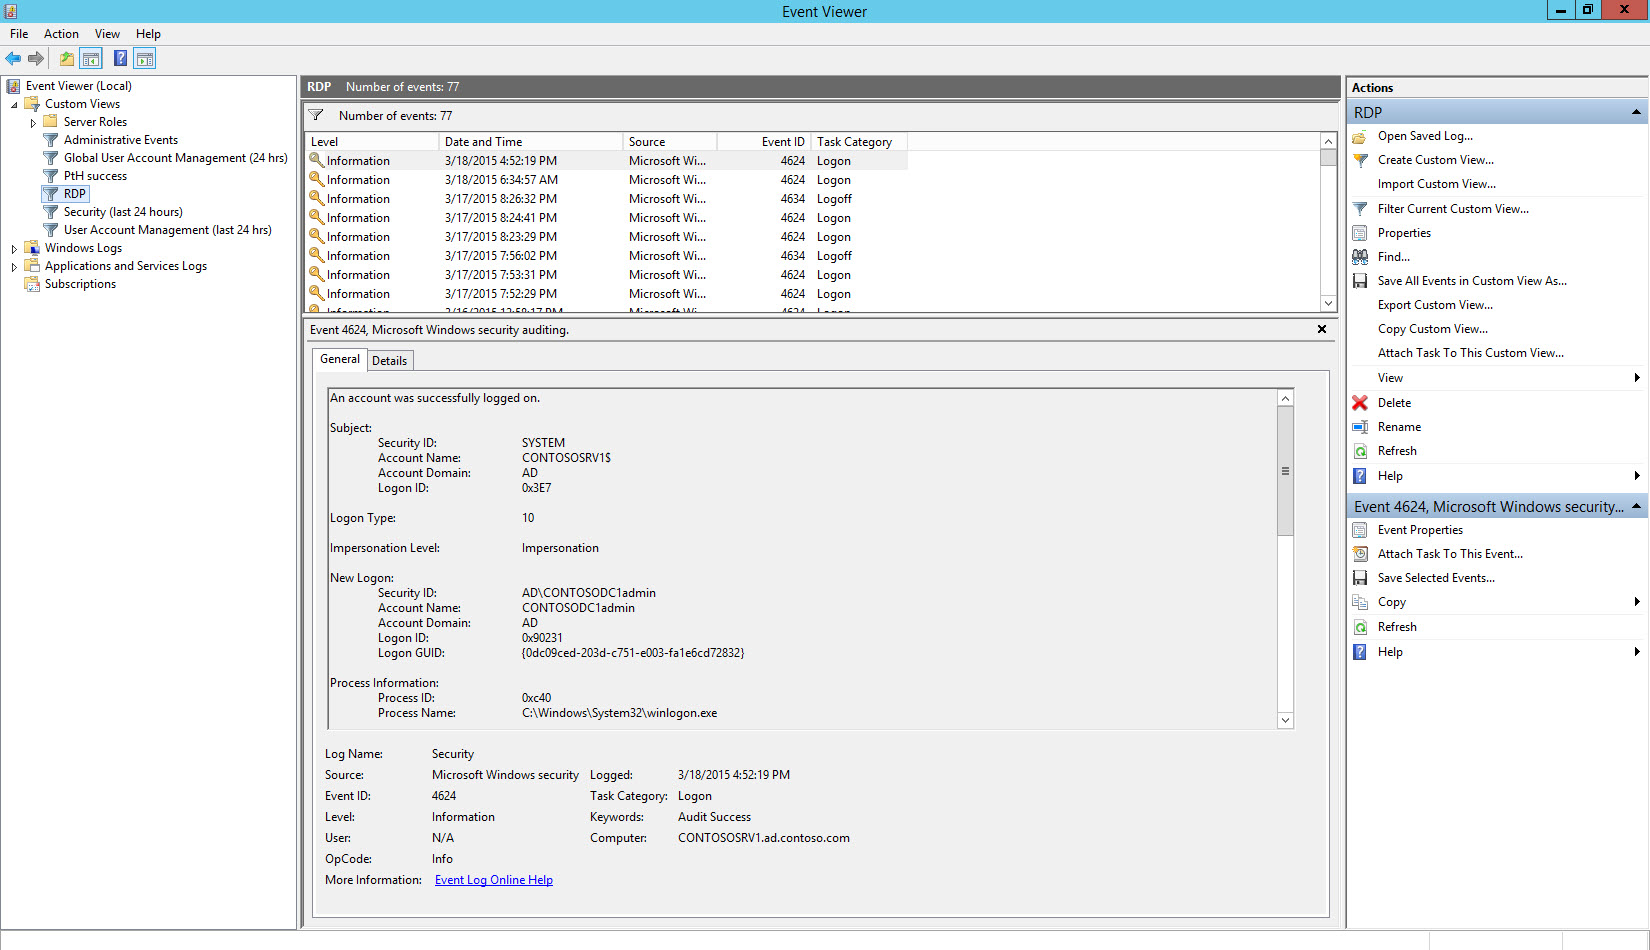 A custom view to show Remote Desktop logons only (Image Credit: Russell Smith)